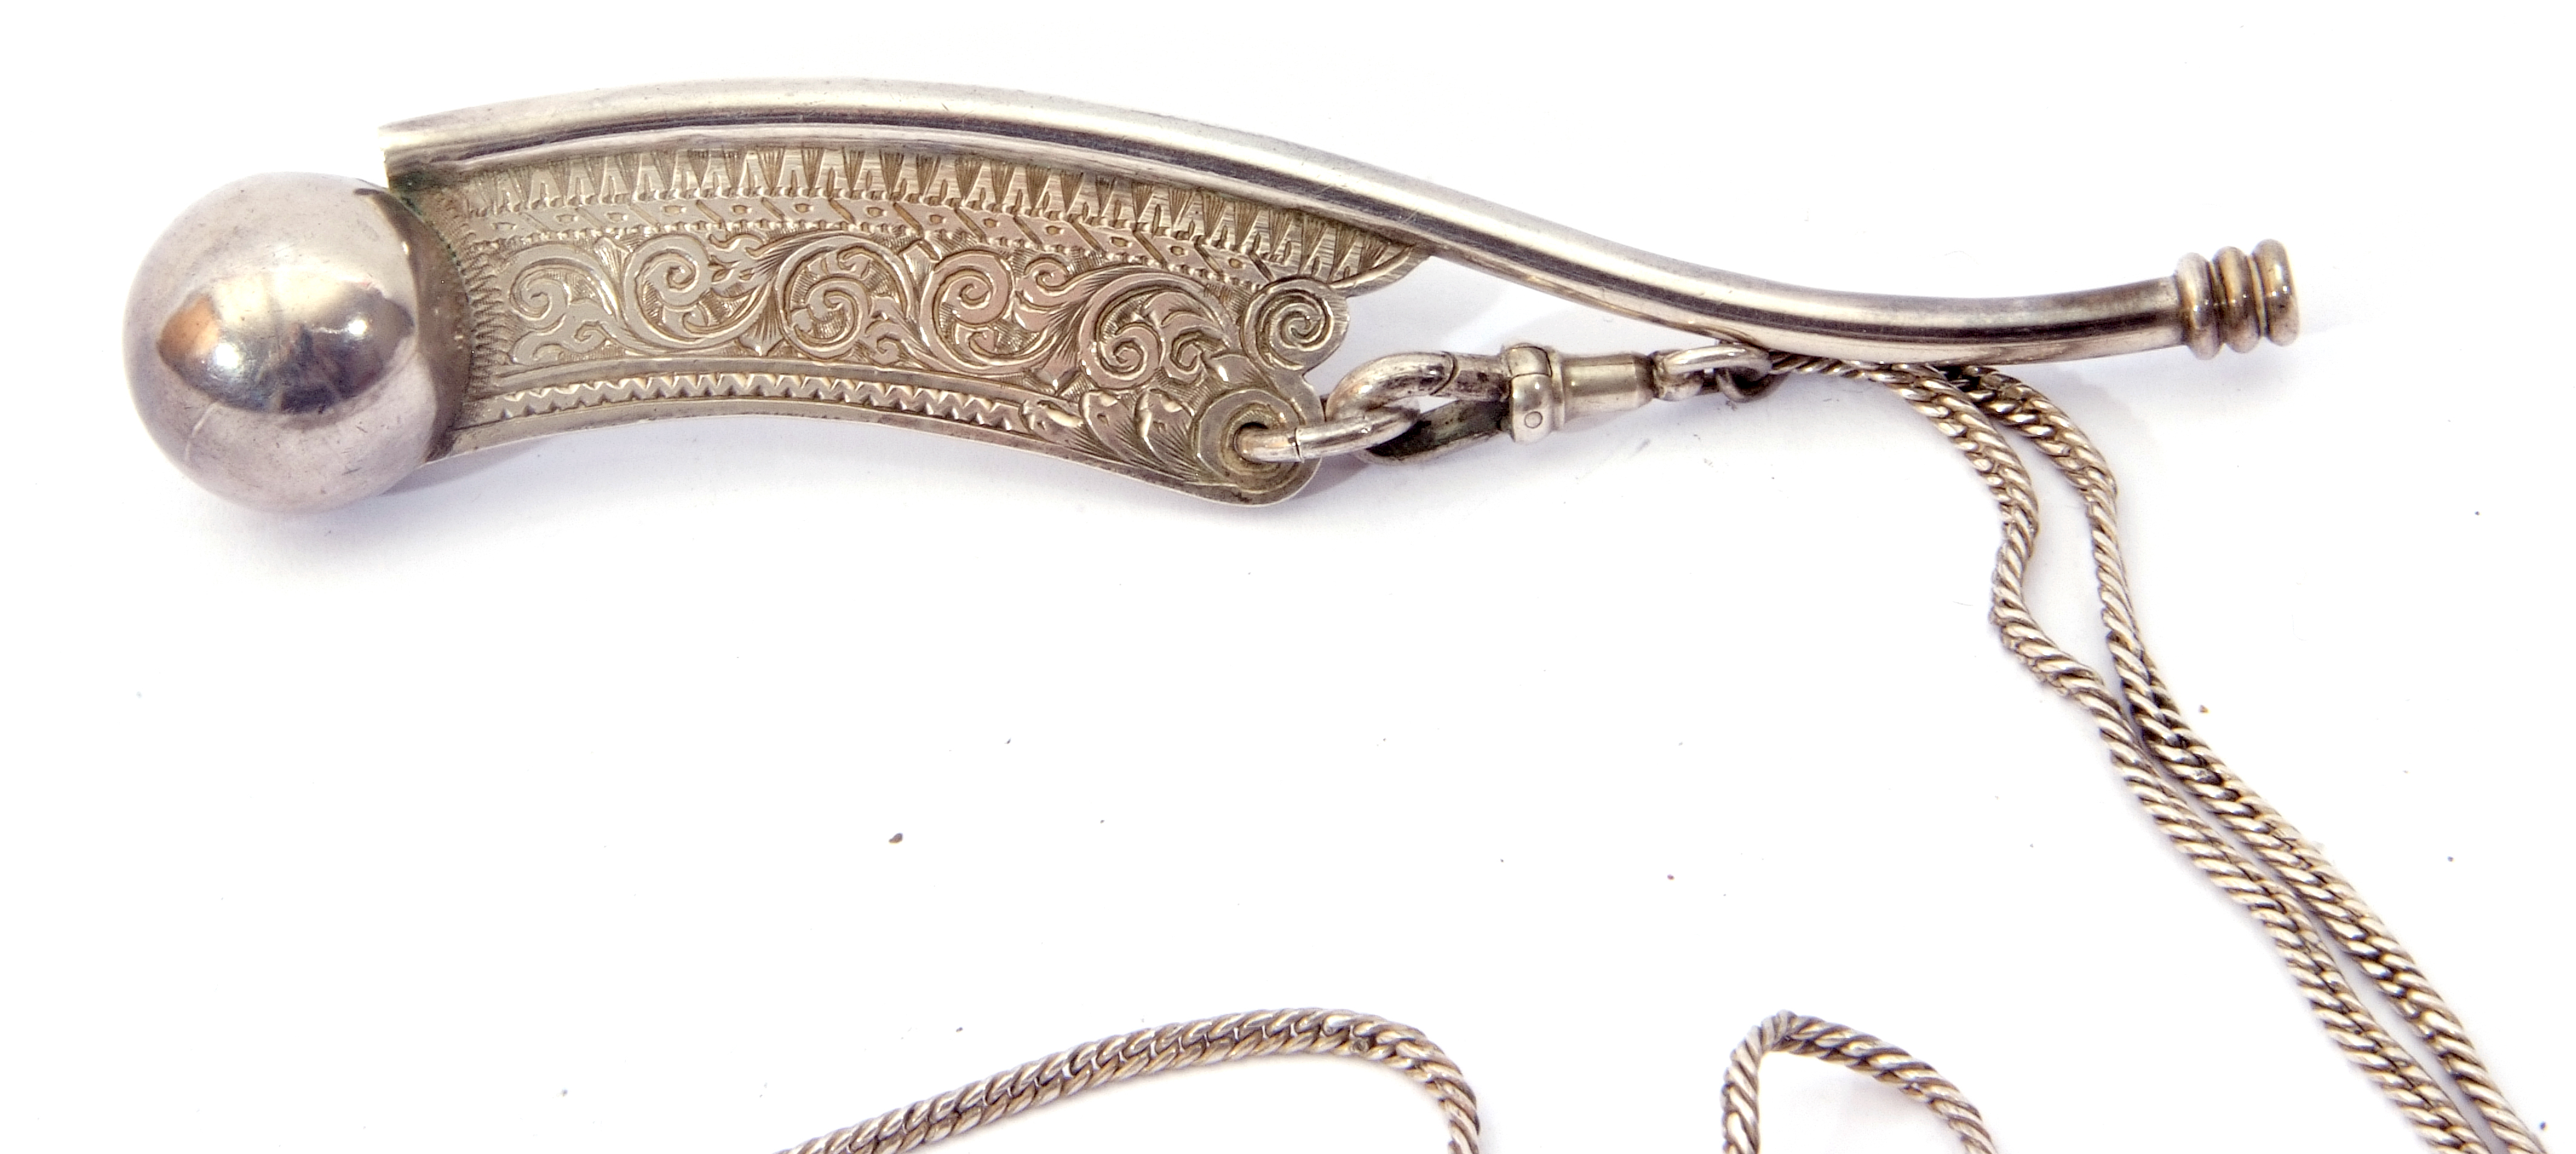 Victorian Bosun's whistle with suspension ring and contemporary engraved inscription, "RNAB PIPING - Image 4 of 4